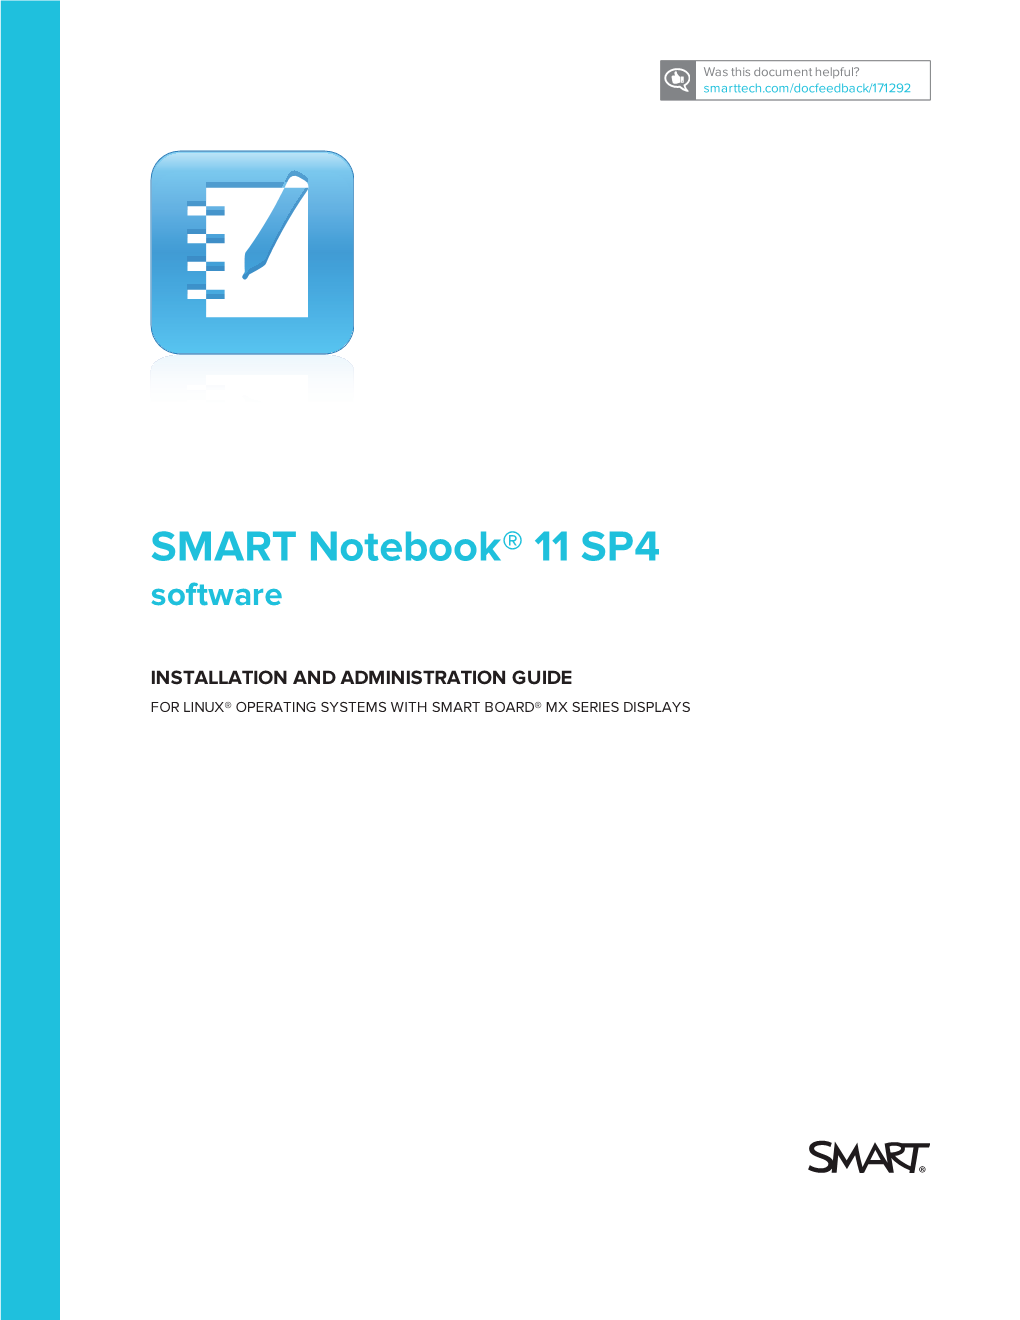 SMART Notebook 11 Software for Linux Installation And